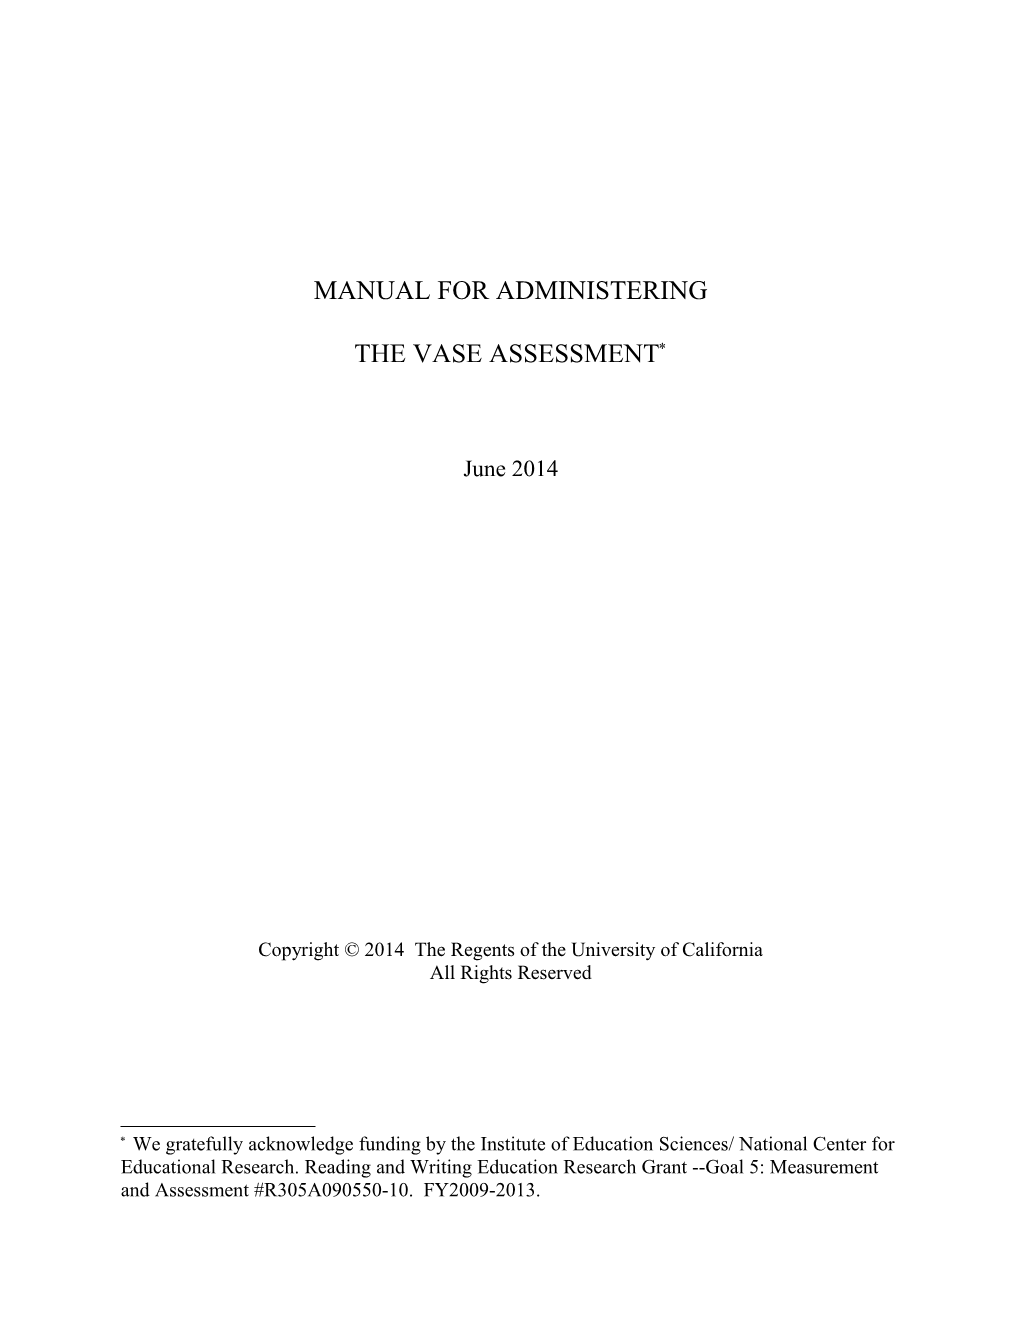 Manual for Administering